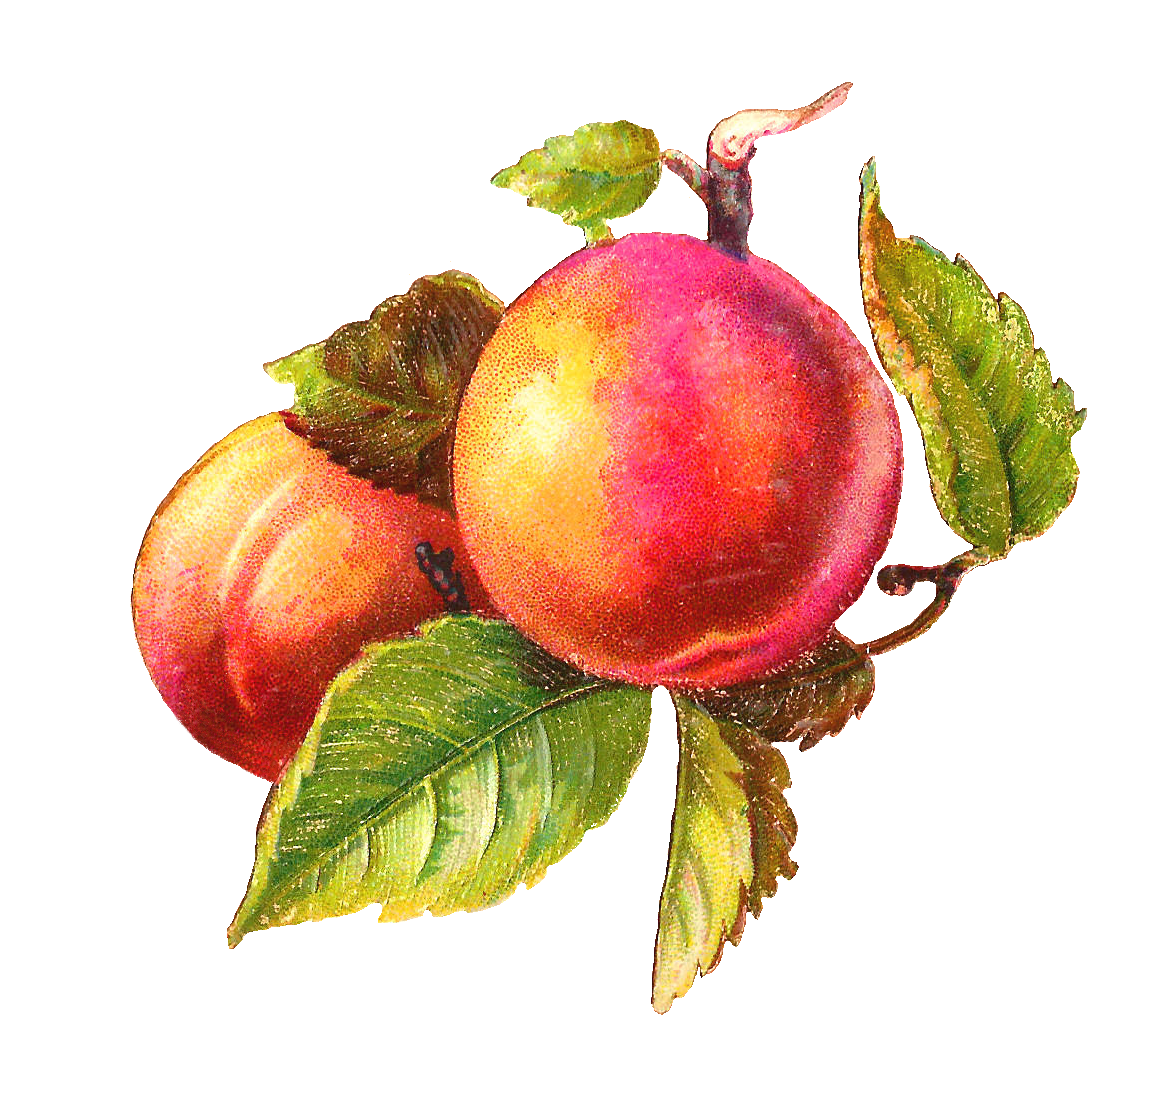 Peach 2 Image Png Image Clipart